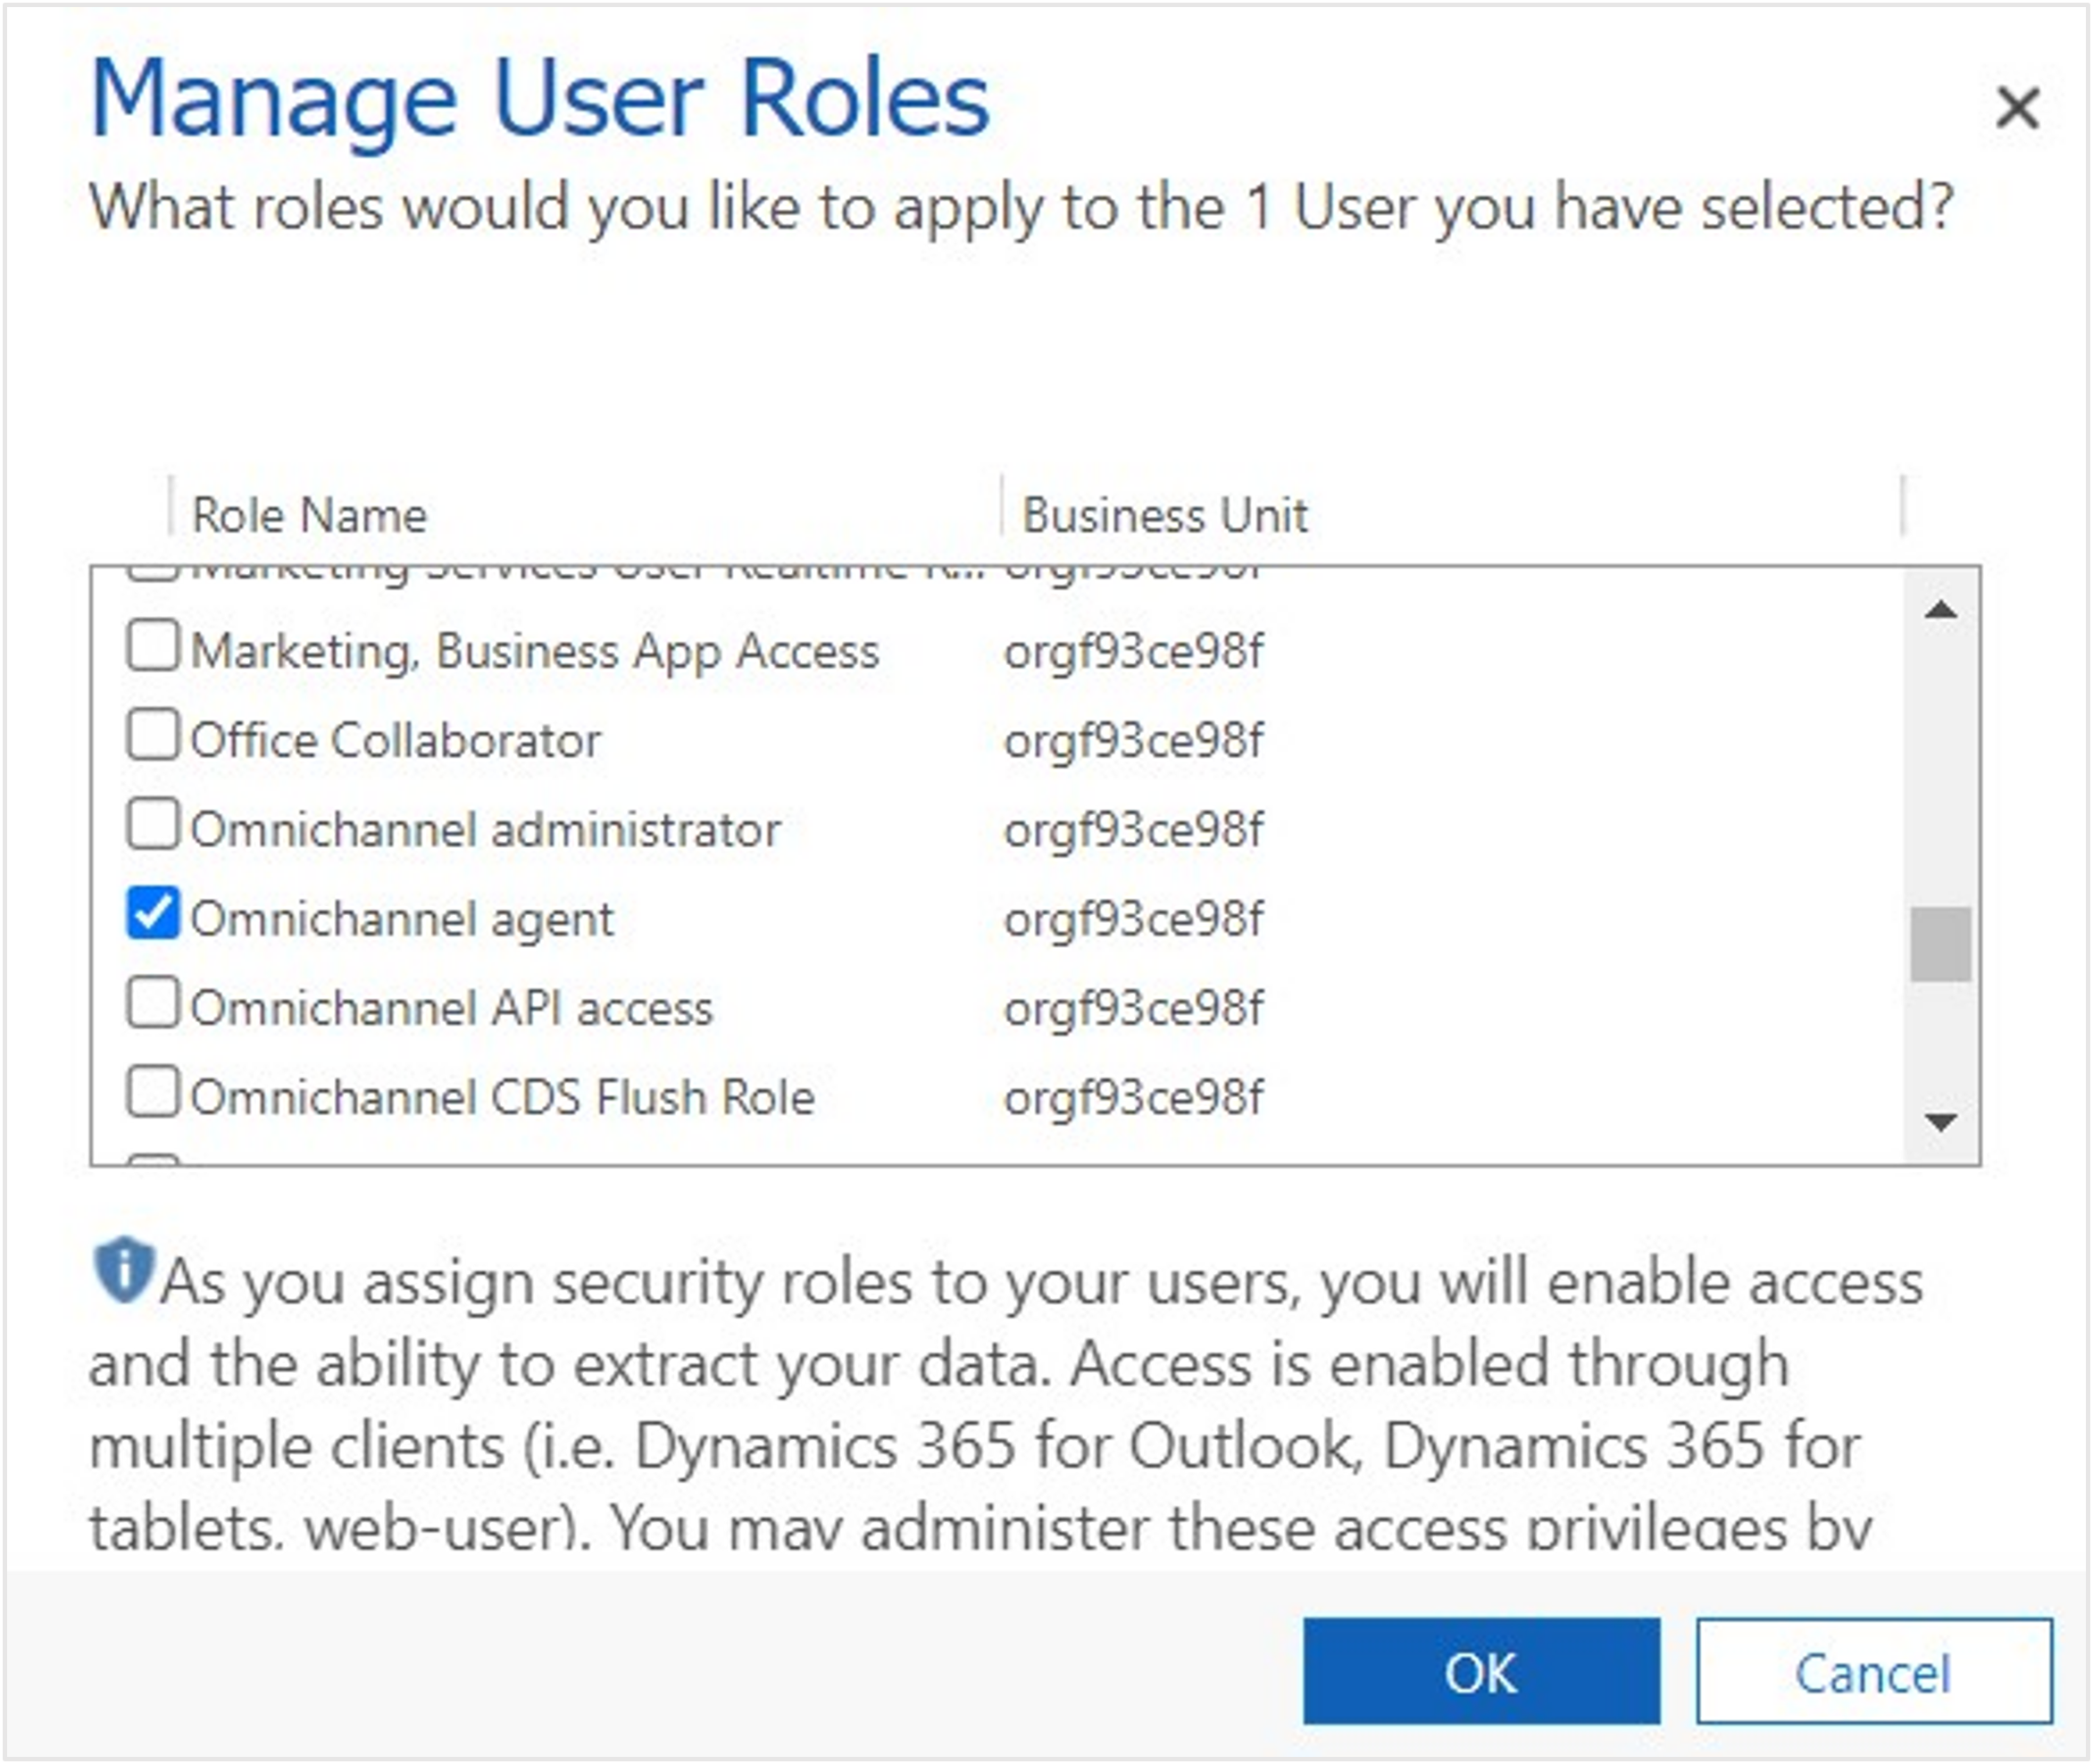 Screenshot of Manage User Roes with the Omnichannel agent Role Name selected.